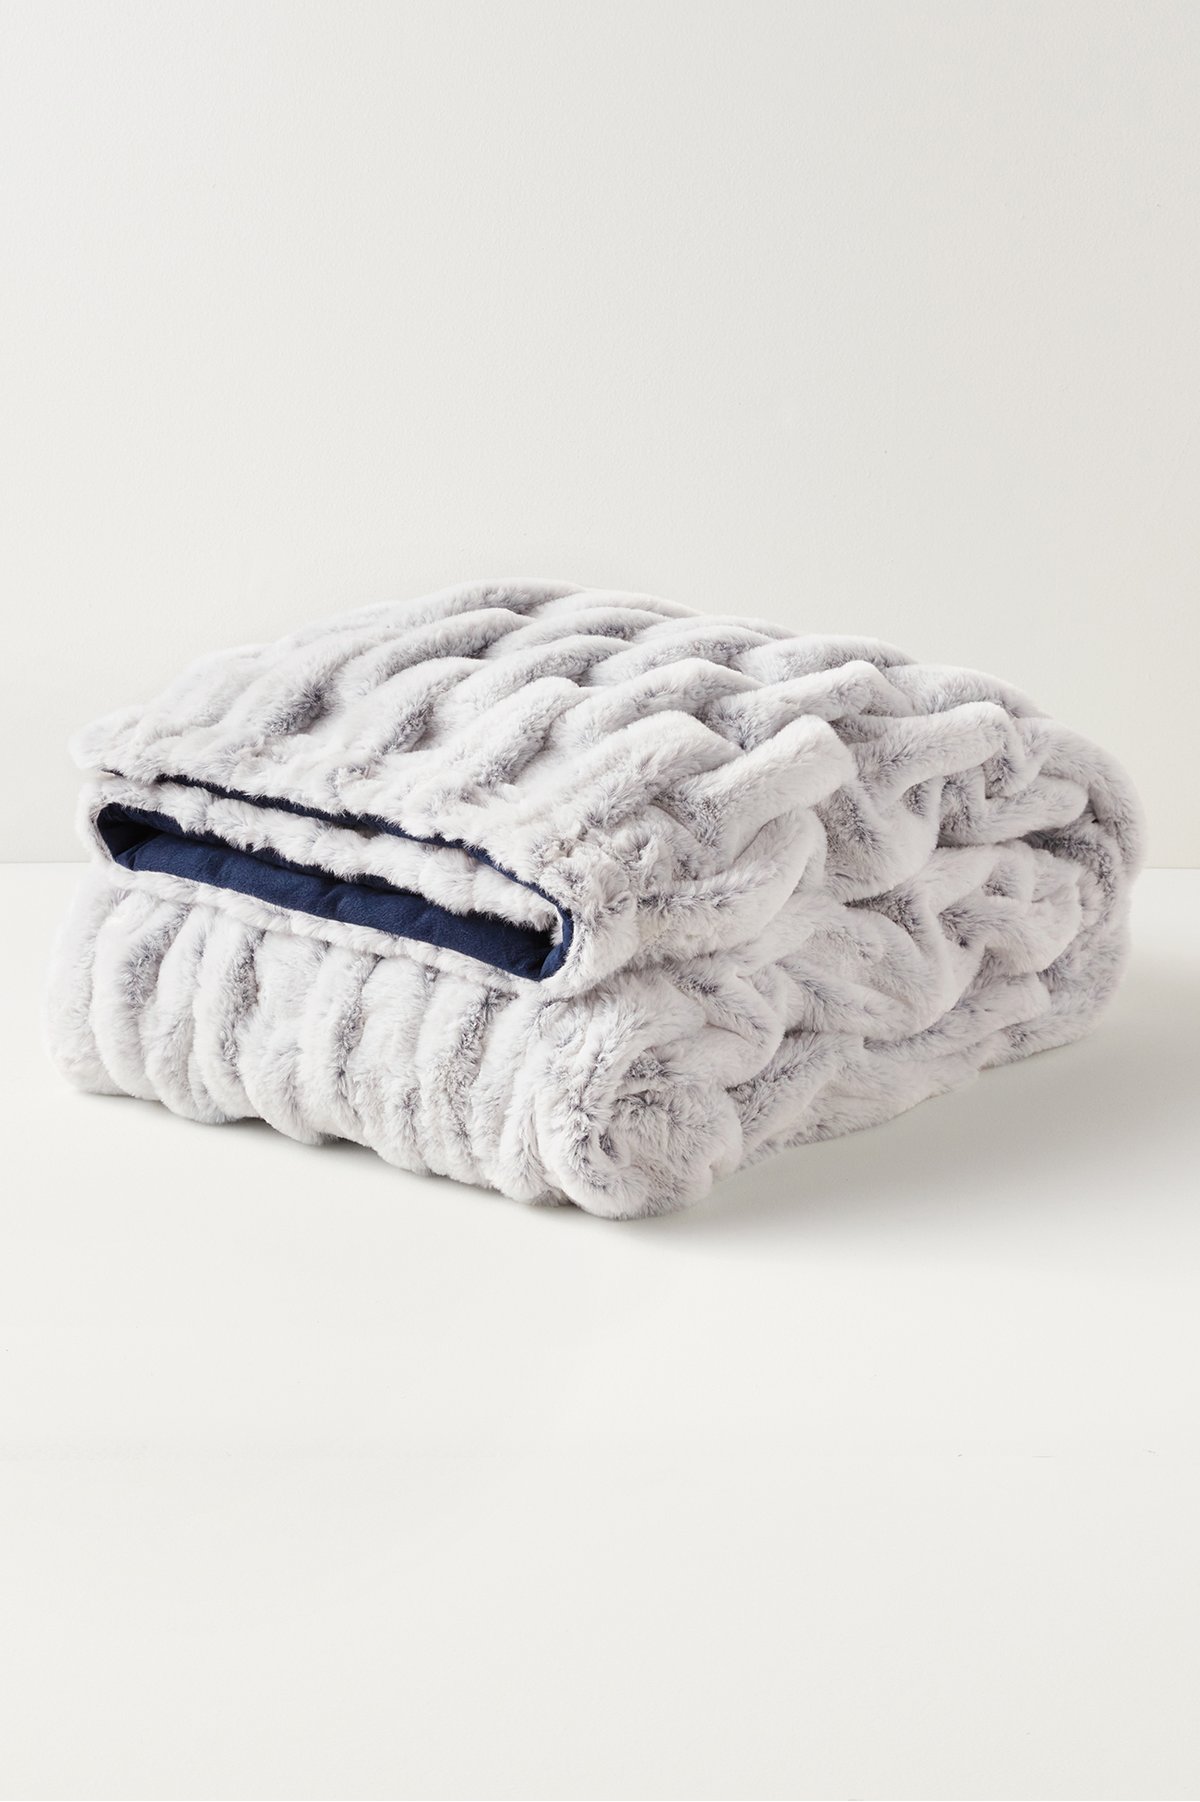 La Parisienne Faux Fur Throw Blanket by Soft Surroundings, in Tipped Midnight